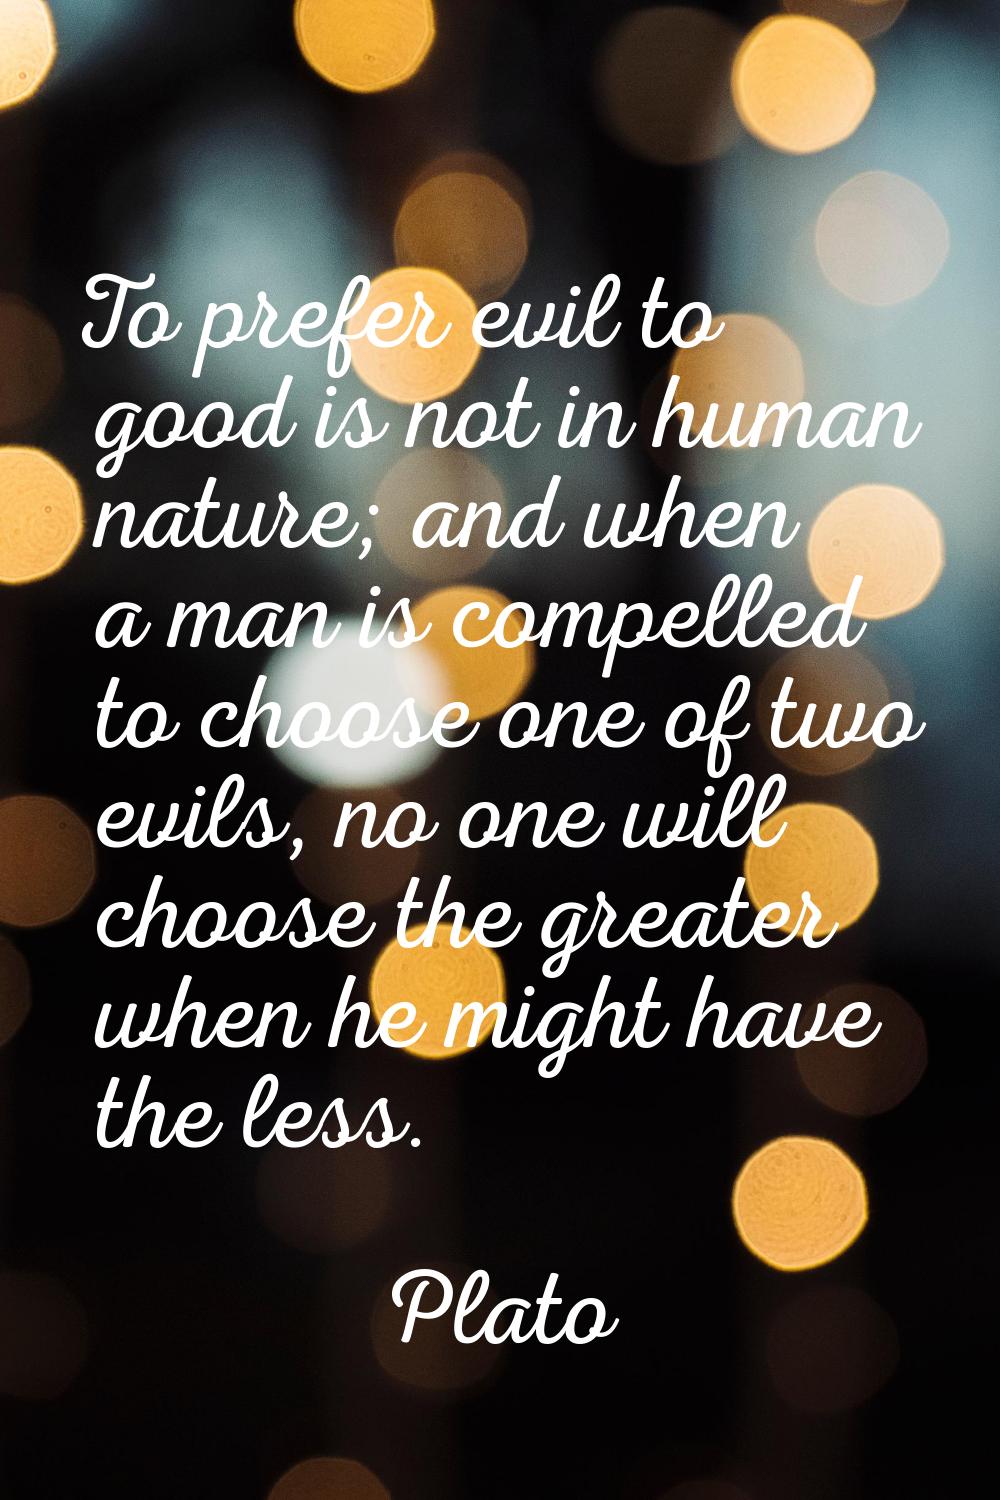 To prefer evil to good is not in human nature; and when a man is compelled to choose one of two evi